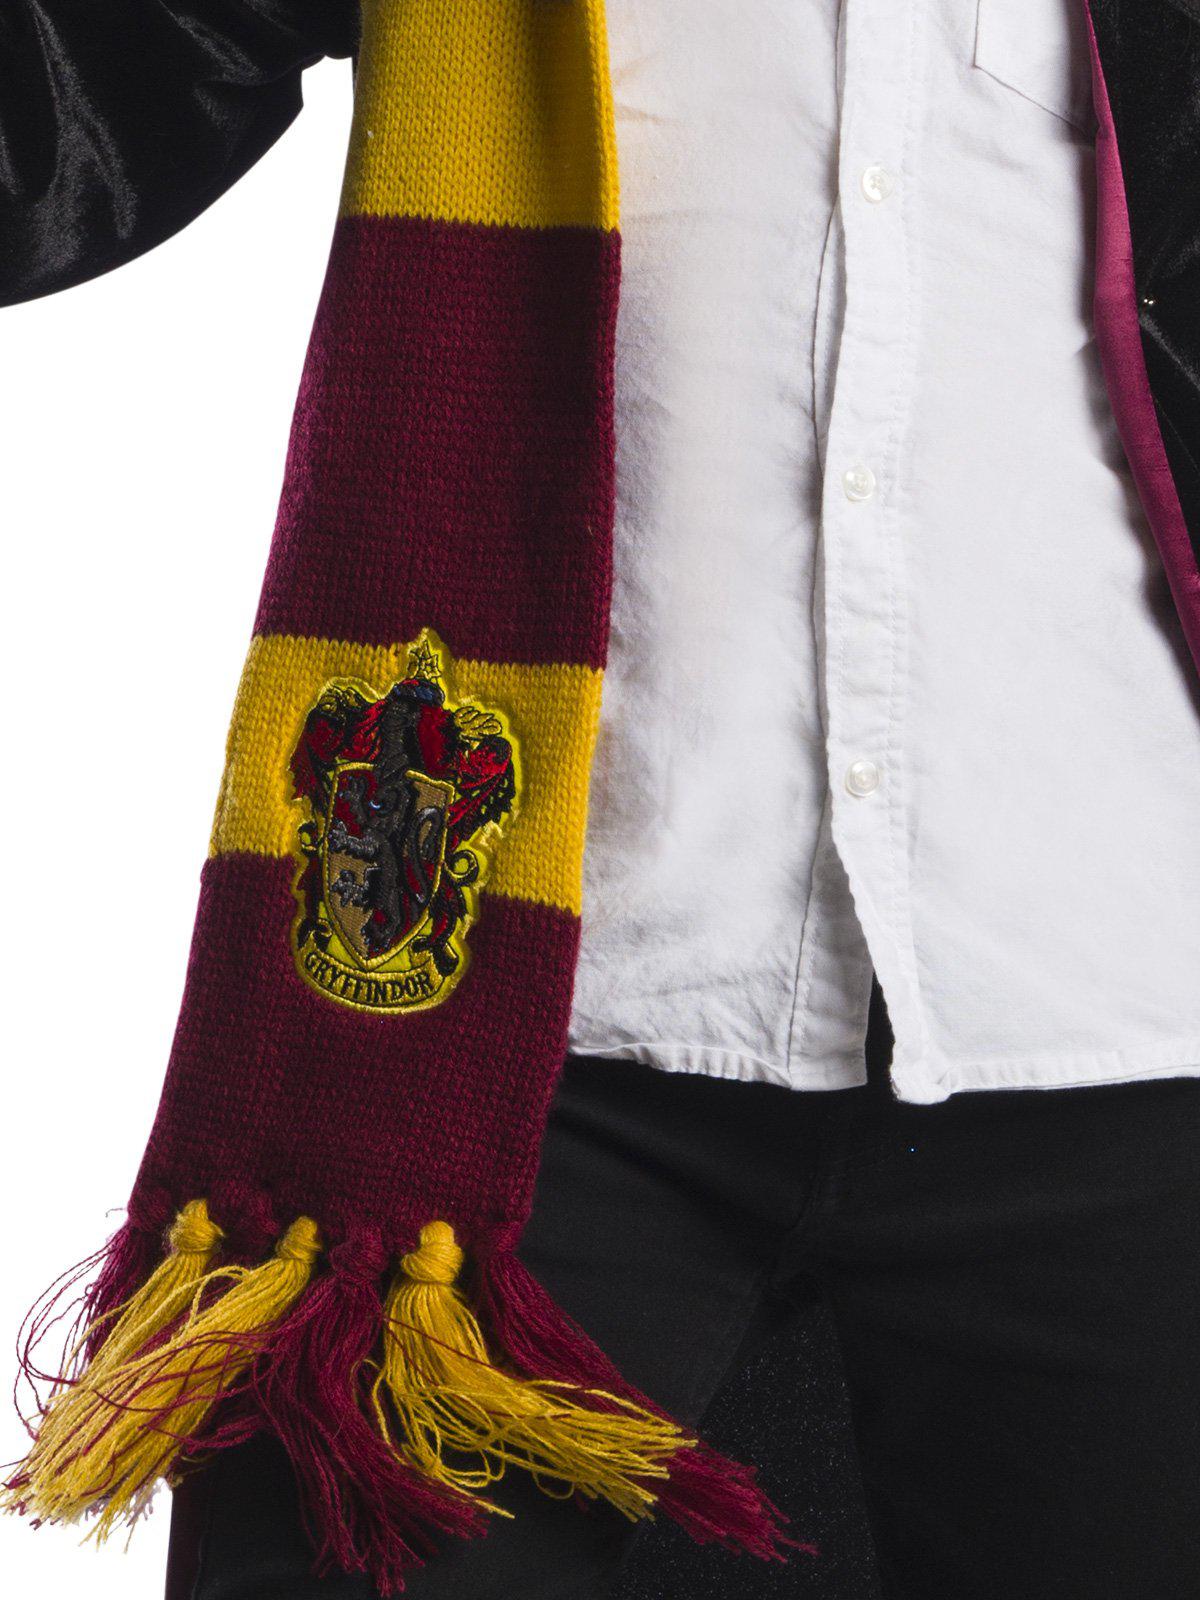 Harry Potter Deluxe Robe With Accessories Kids